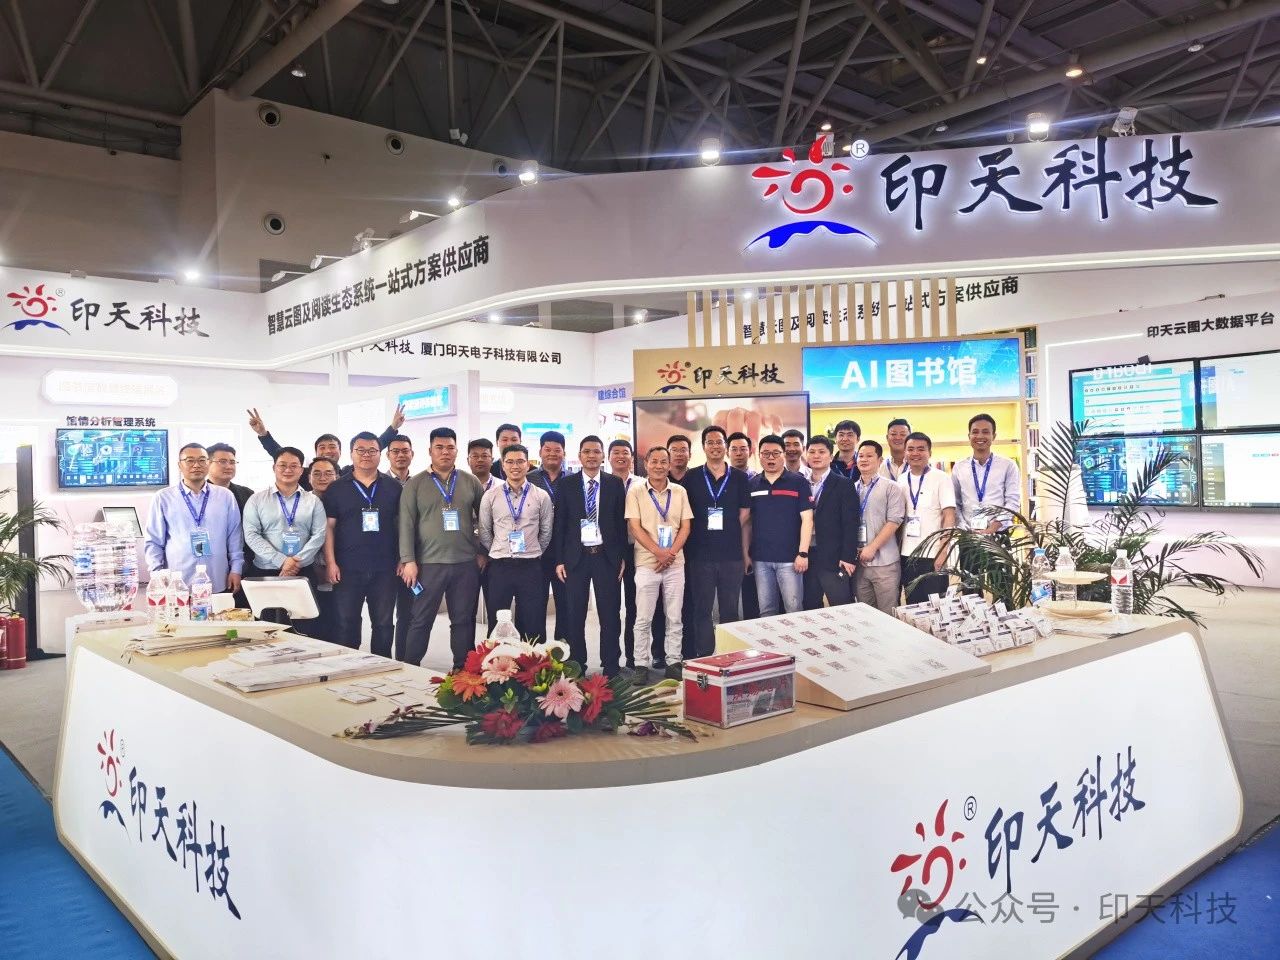 Intech at the 83rd China Educational Equipment Exhibition